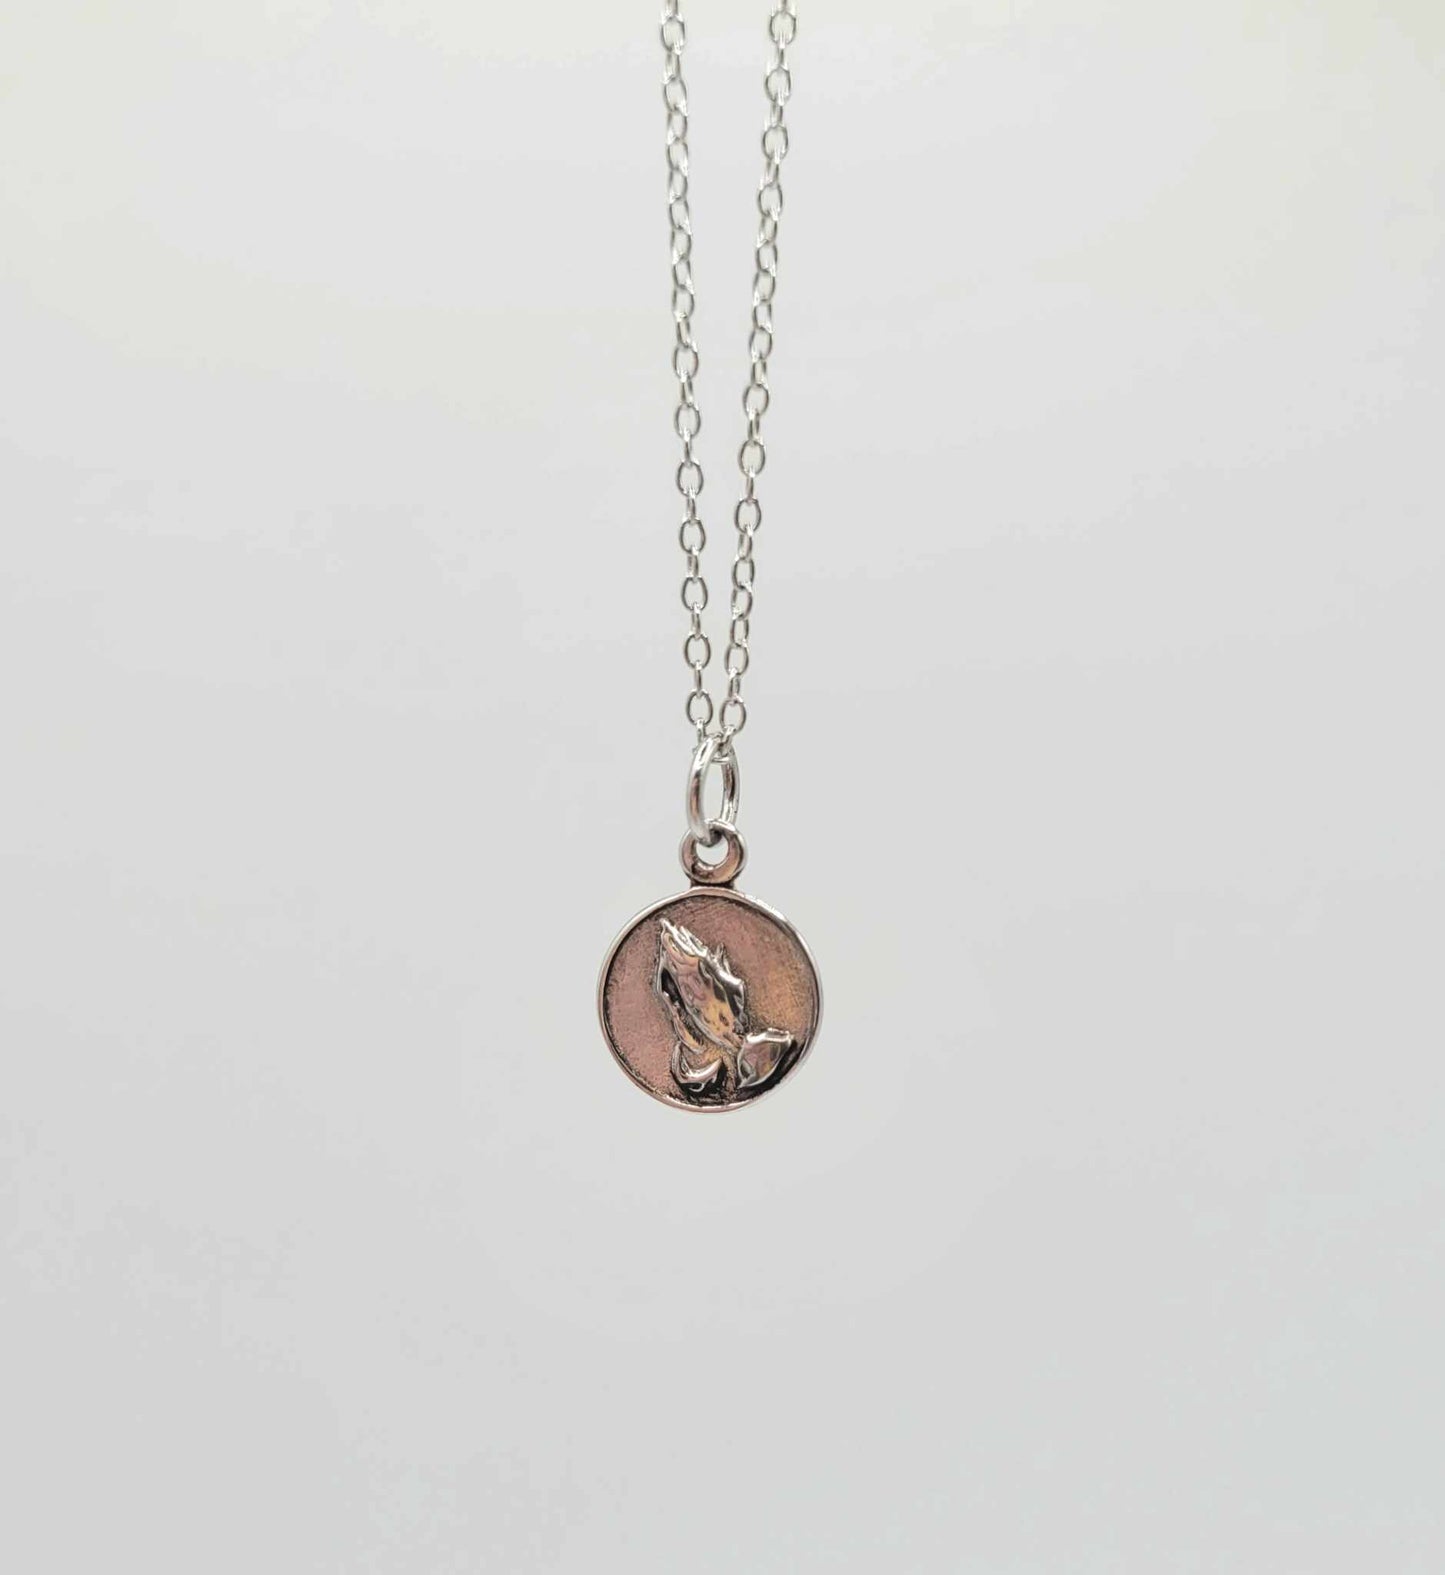 Jolie Children's Sterling Silver Necklace with Praying Hands Pendant